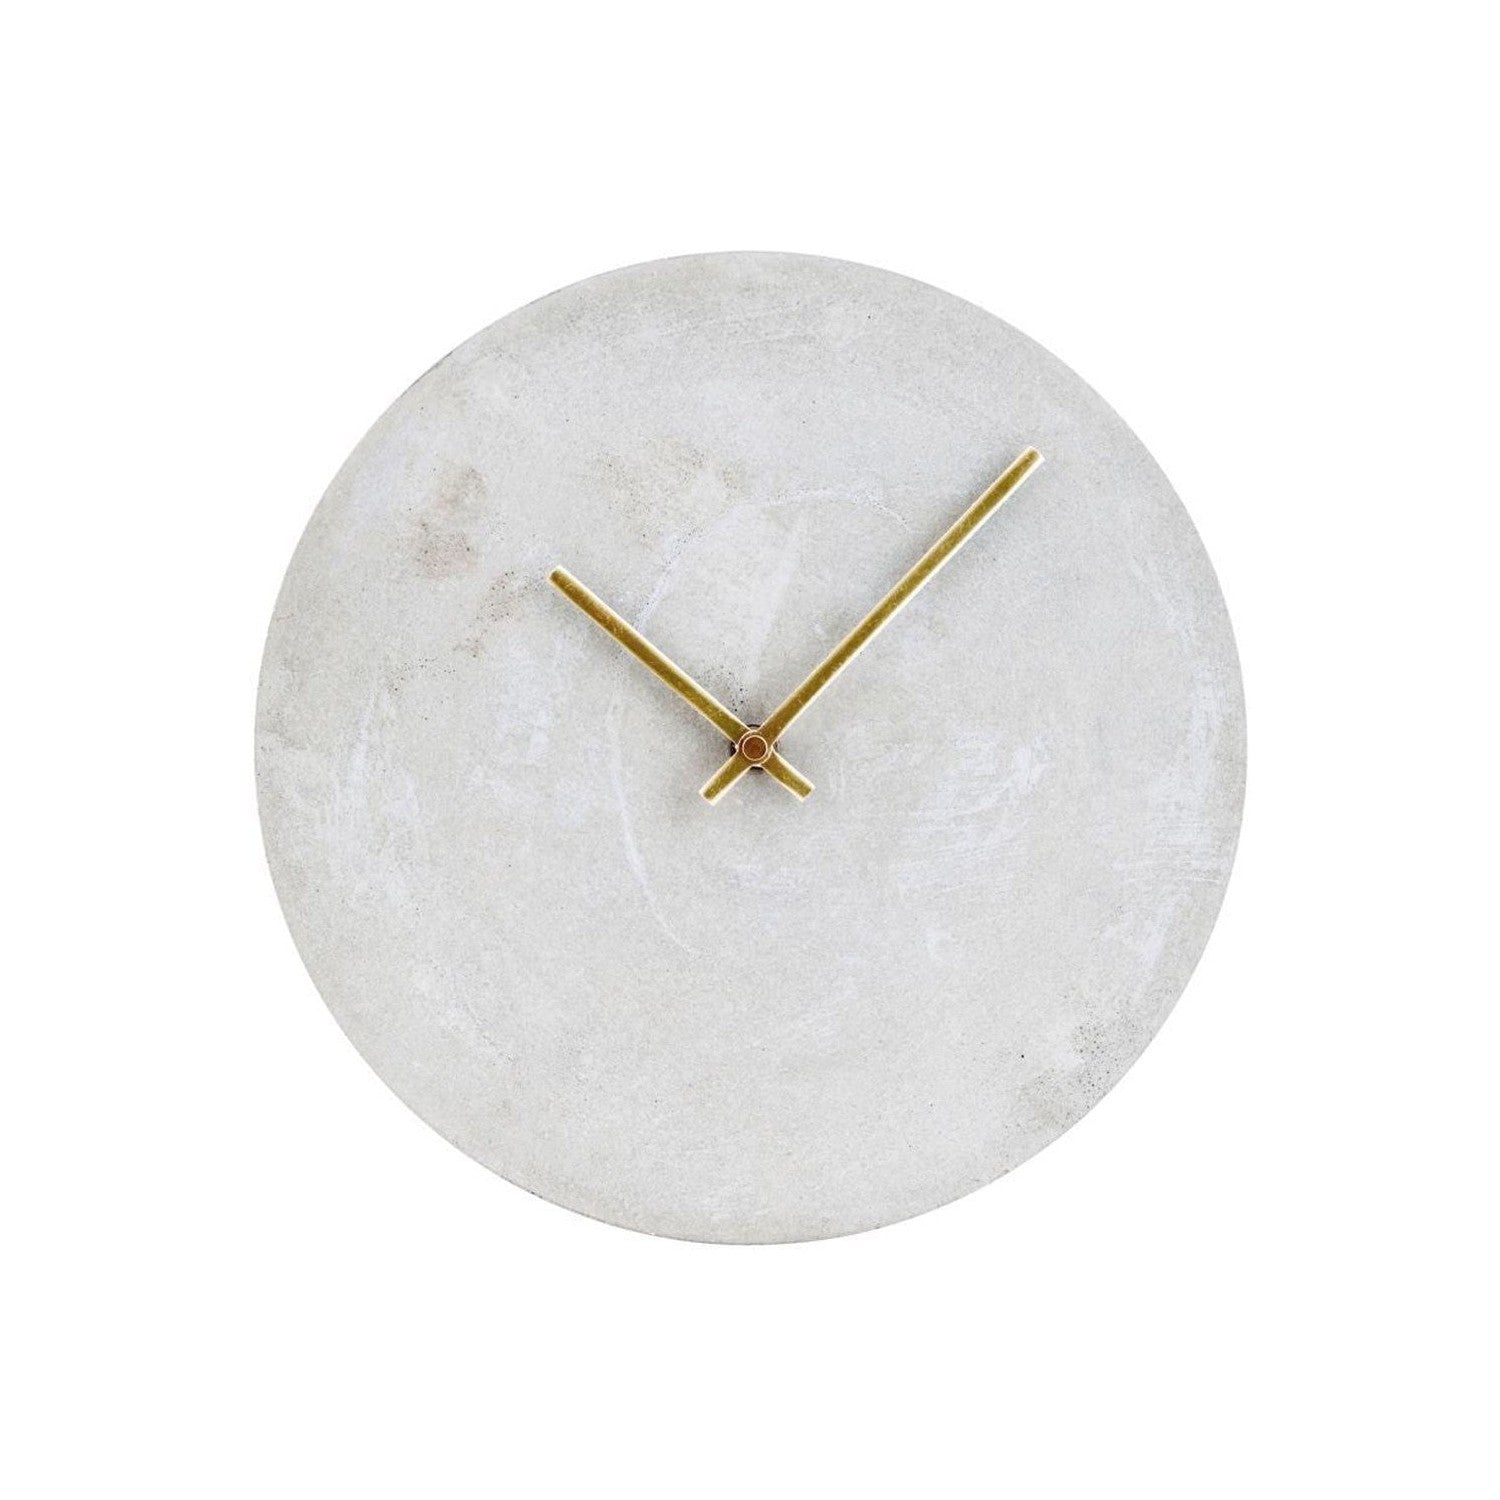 House Doctor Wall clock, HDWatch, Concrete